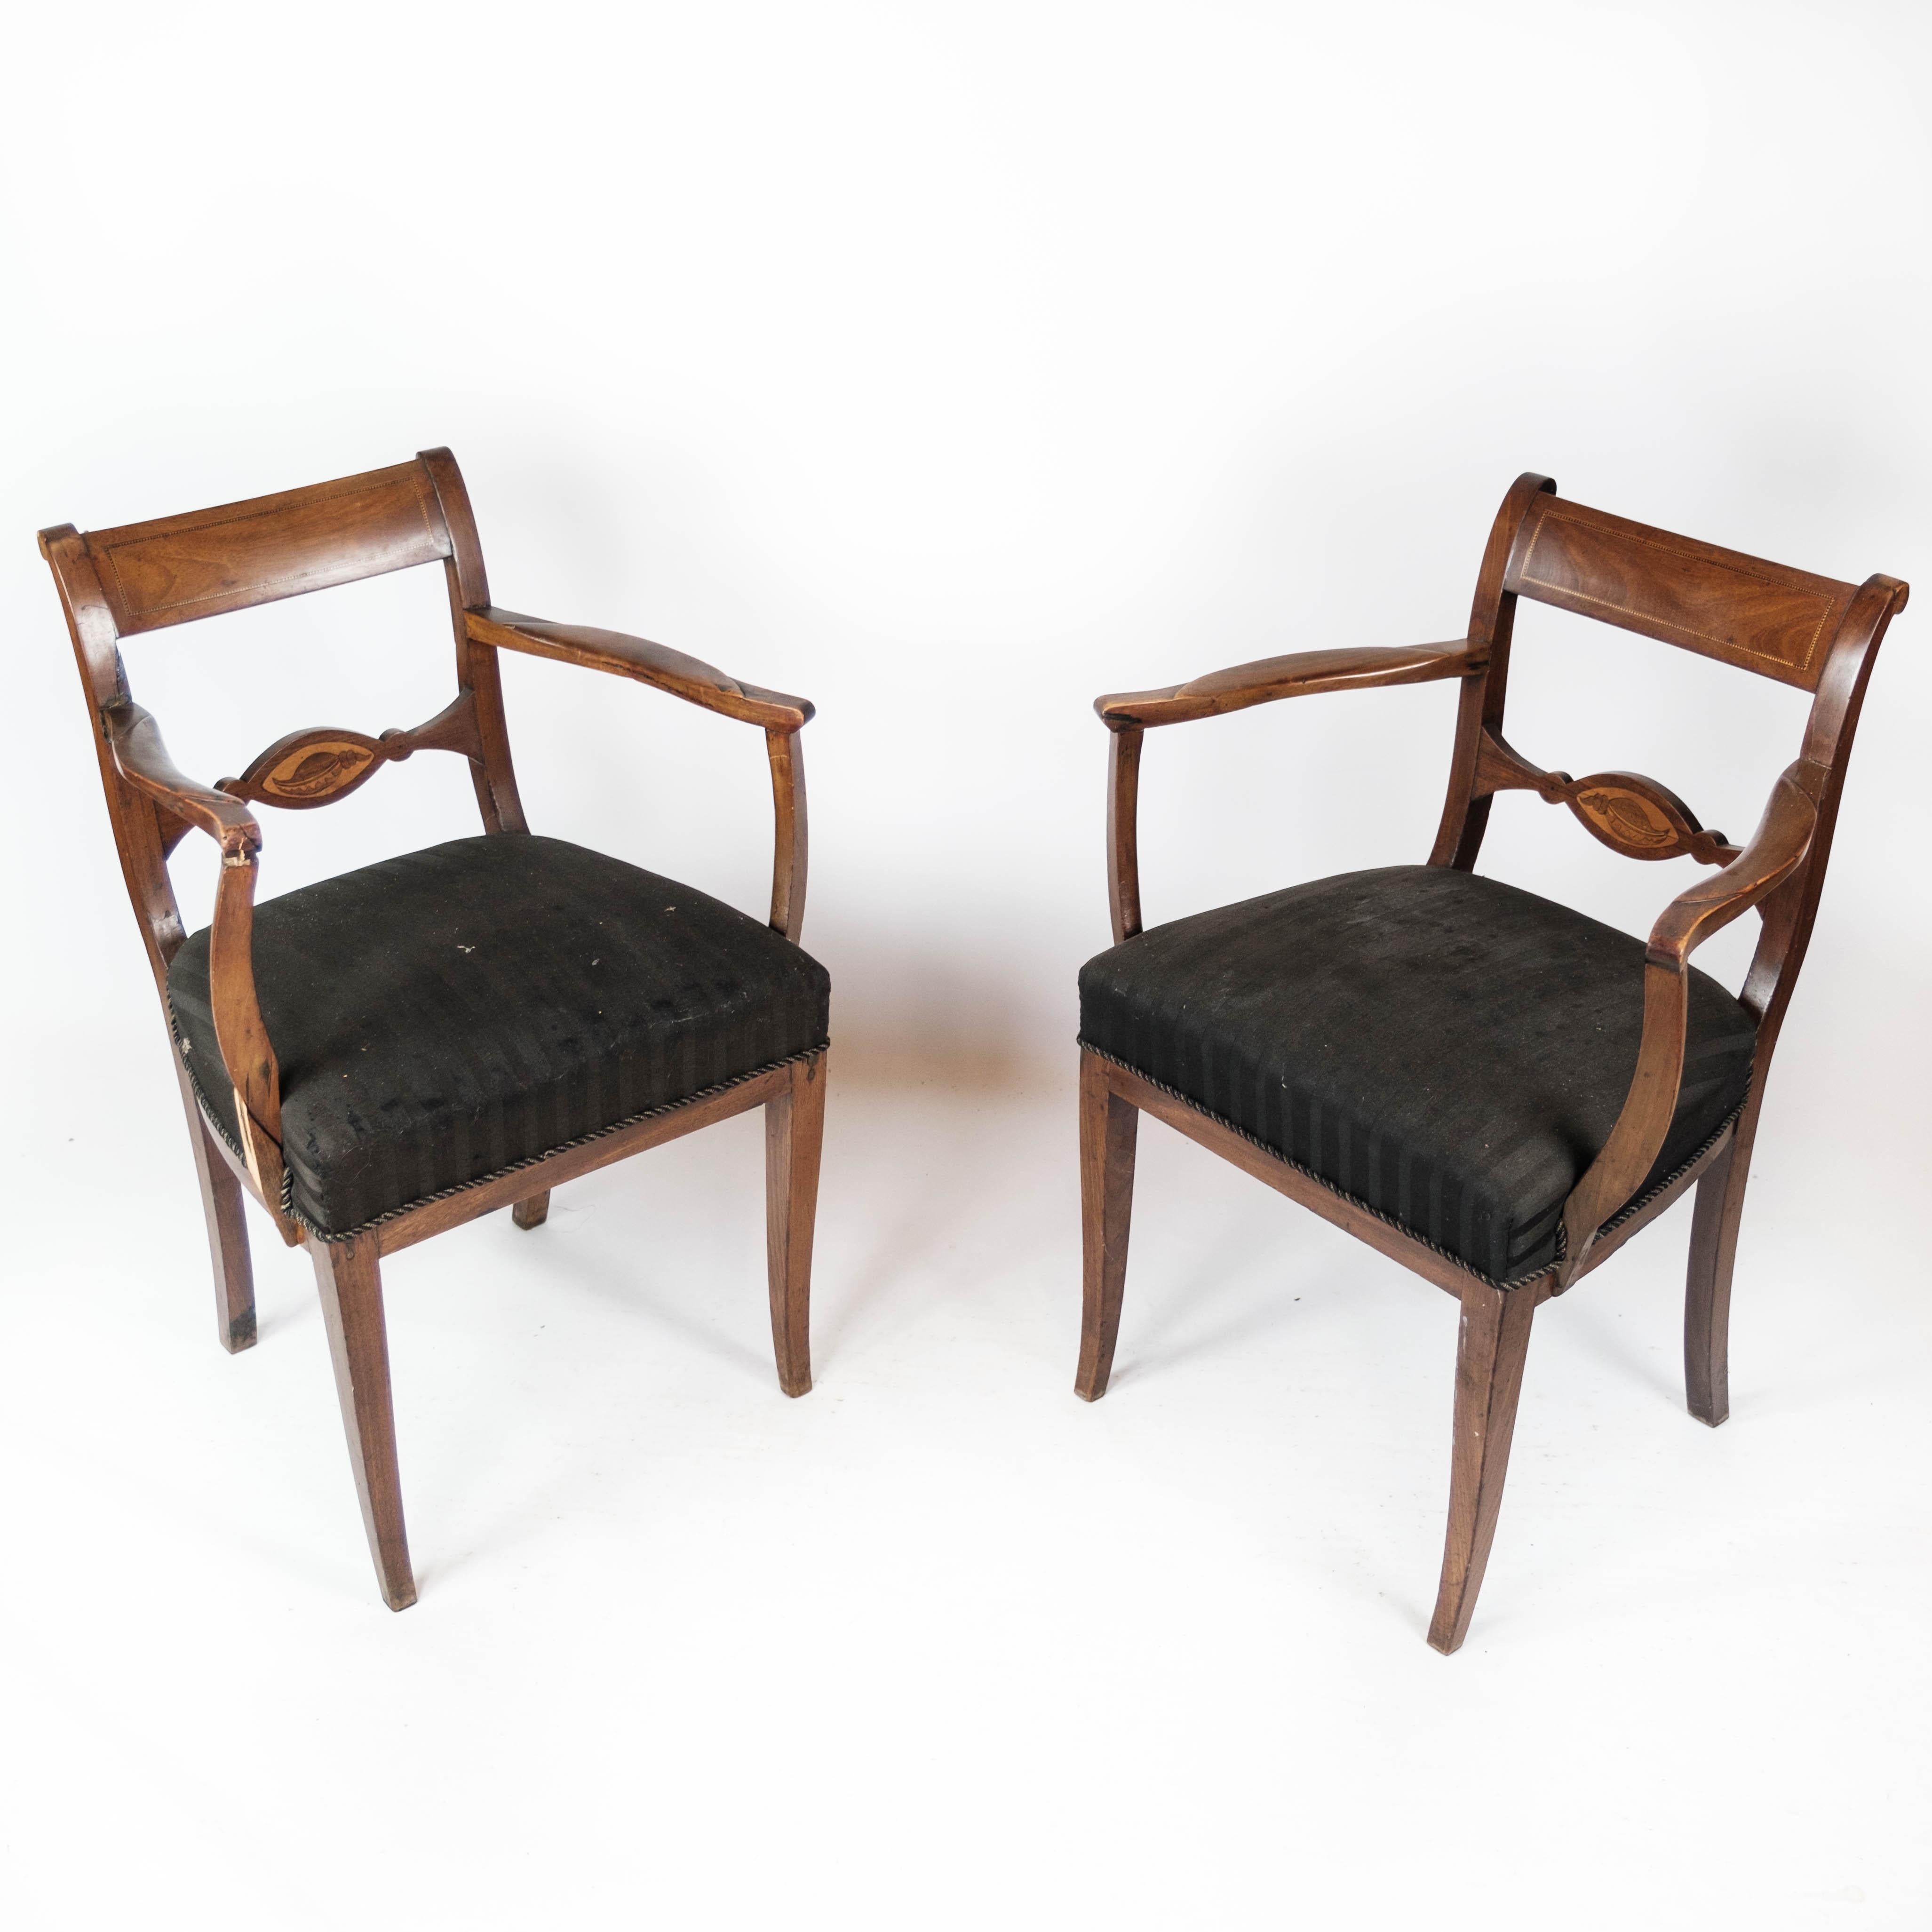 These two mahogany armchairs, upholstered in sleek black fabric, date back to the elegant era of the 1860s. Their timeless design and classic upholstery make them a sophisticated addition to any interior.

Despite their age, these chairs are in good